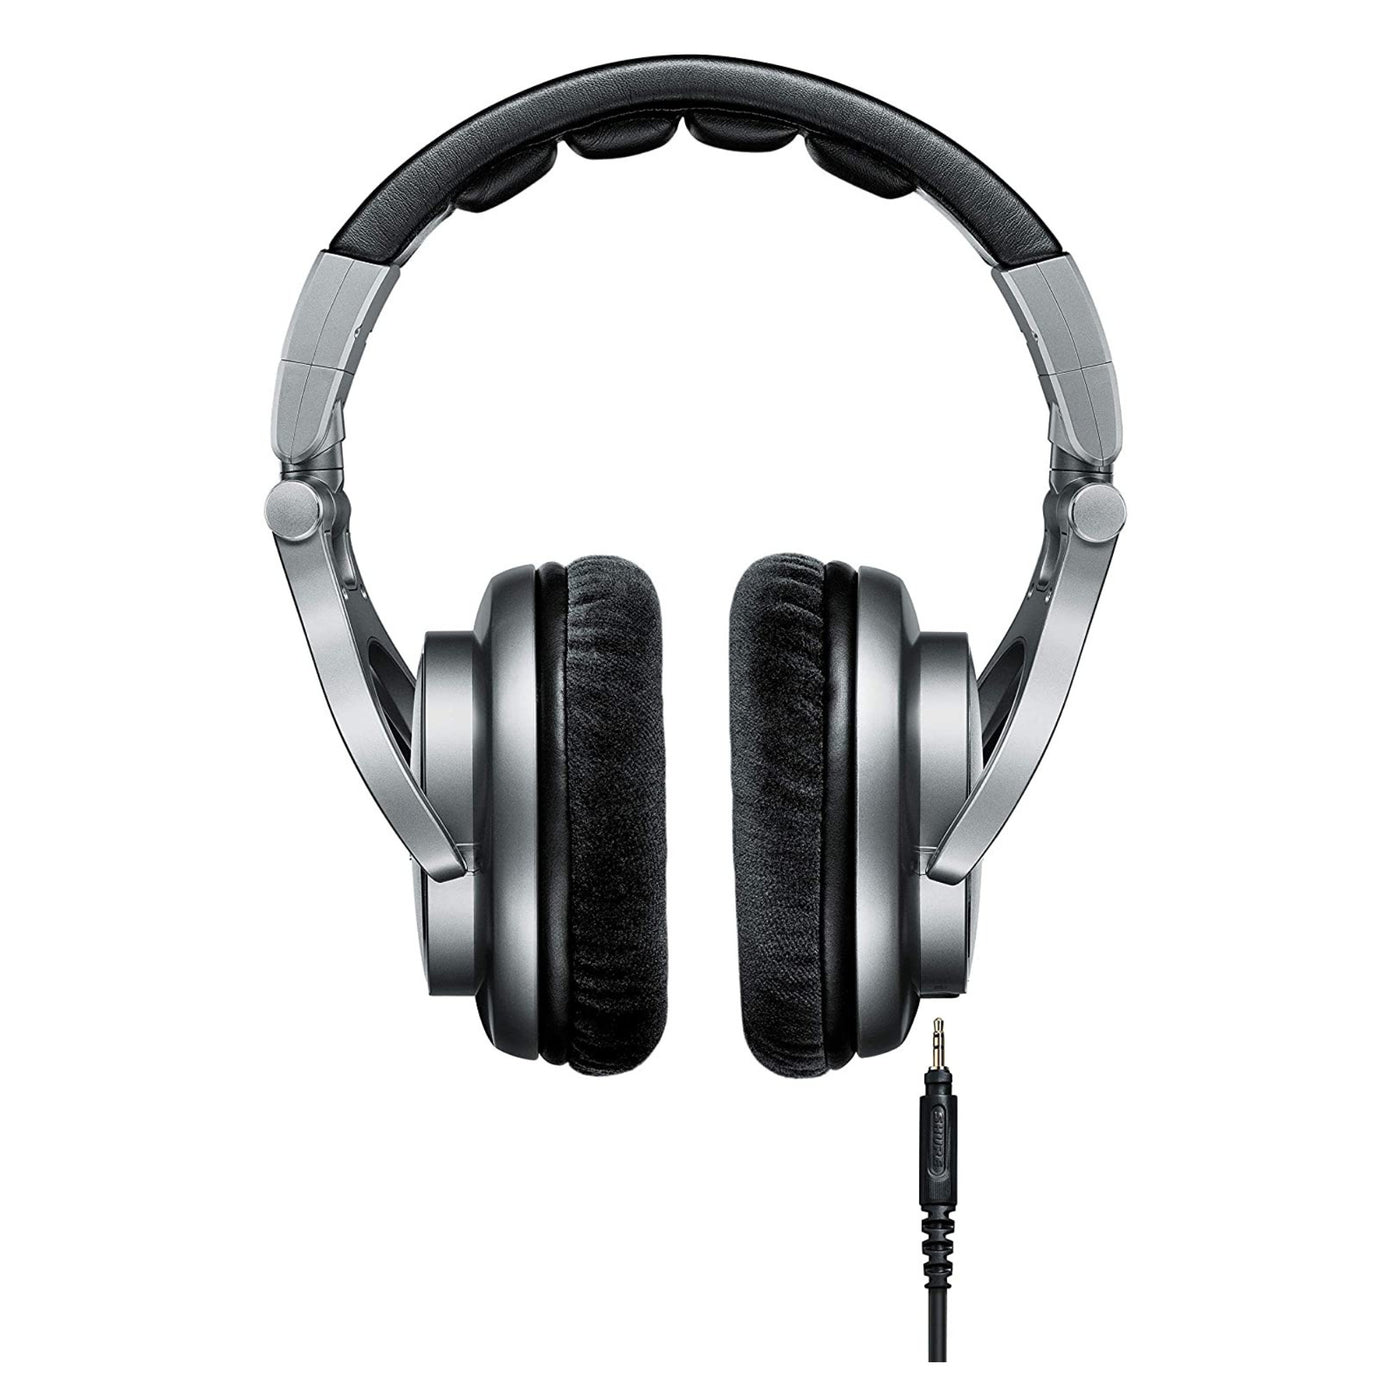 Shure SRH940 Professional Closed-Back Reference Headphones